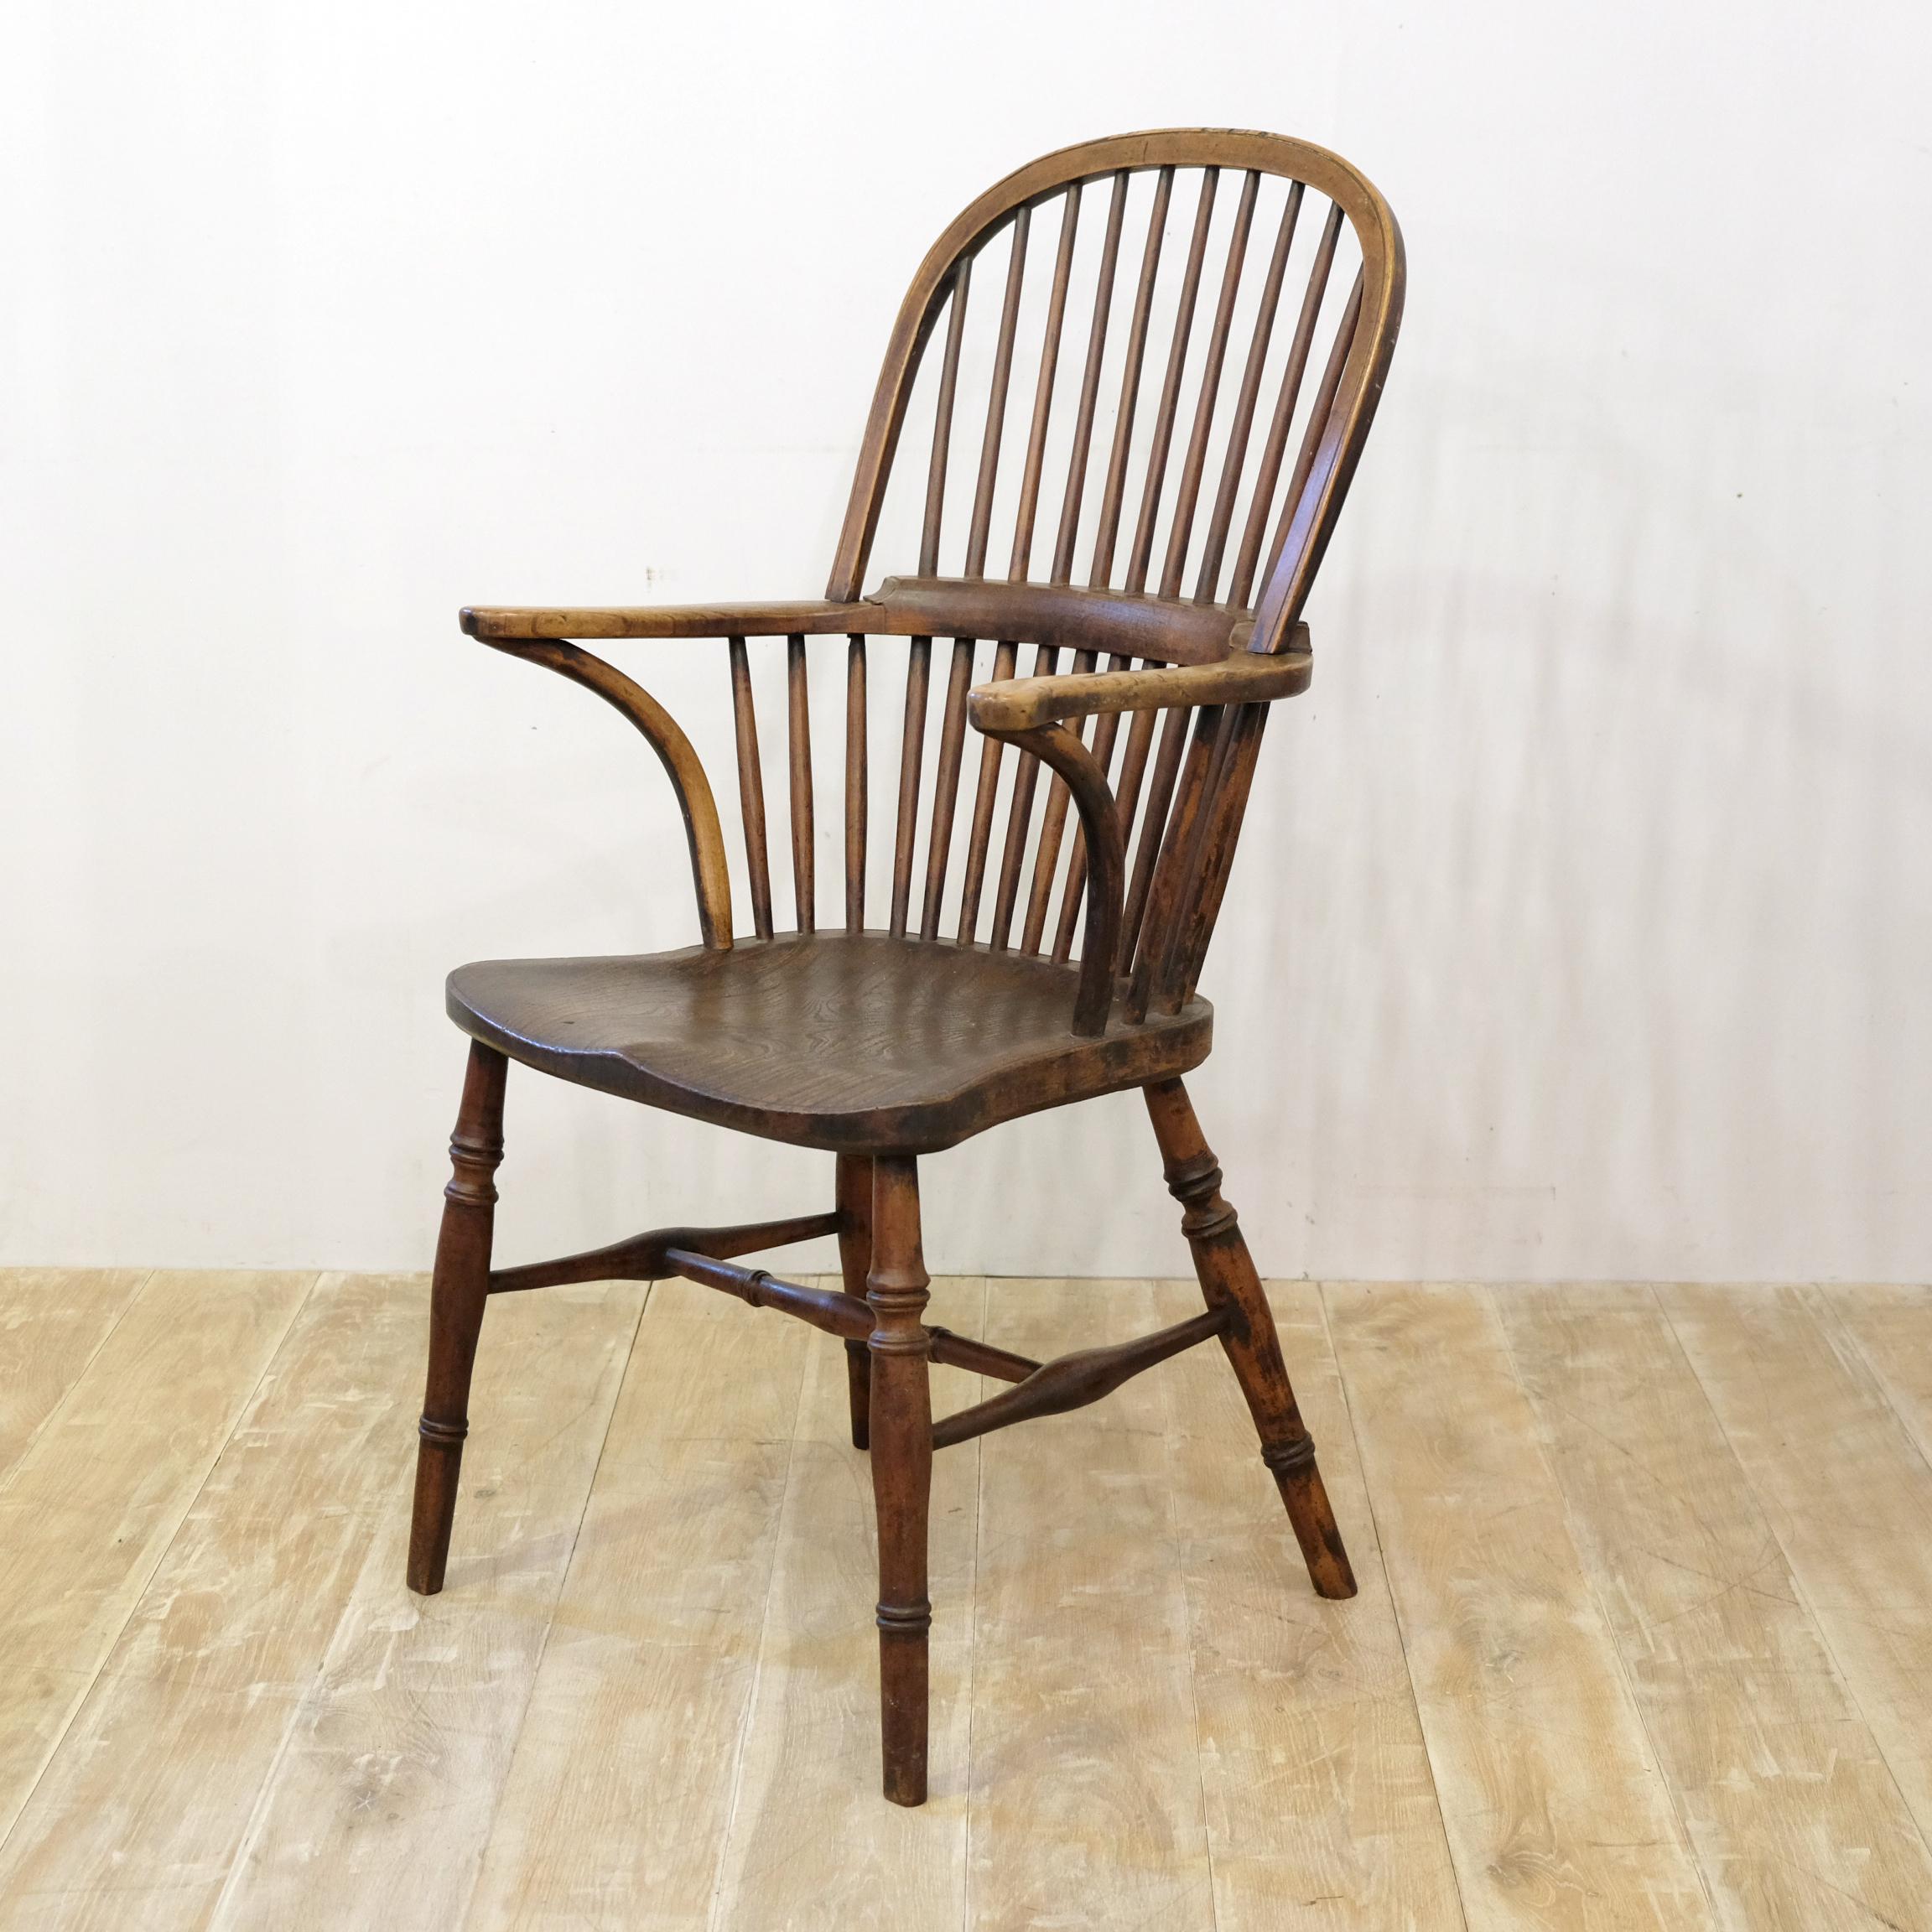 Well formed and aesthetically pleasing late 19th century English made Windsor chair, likely Thames Valley in origin. Ash and elm with turned legs and stretchers, out-splayed arms, curved supports and simple stick back. Pleasing color, not over